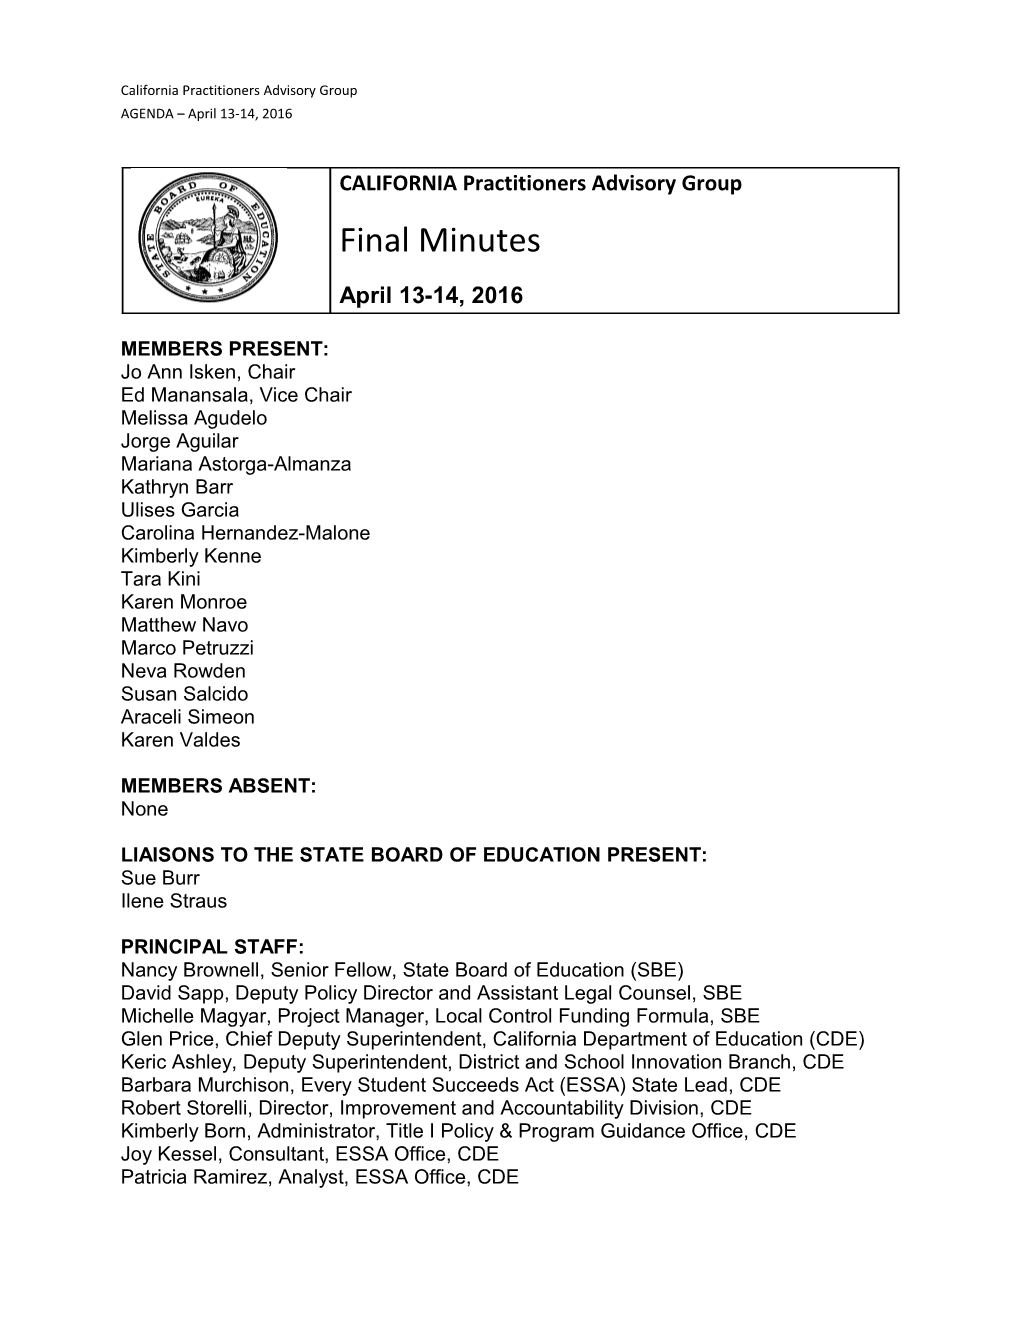 April 13 14, 2016 Meeting Minutes - CPAG (CA State Board of Education)